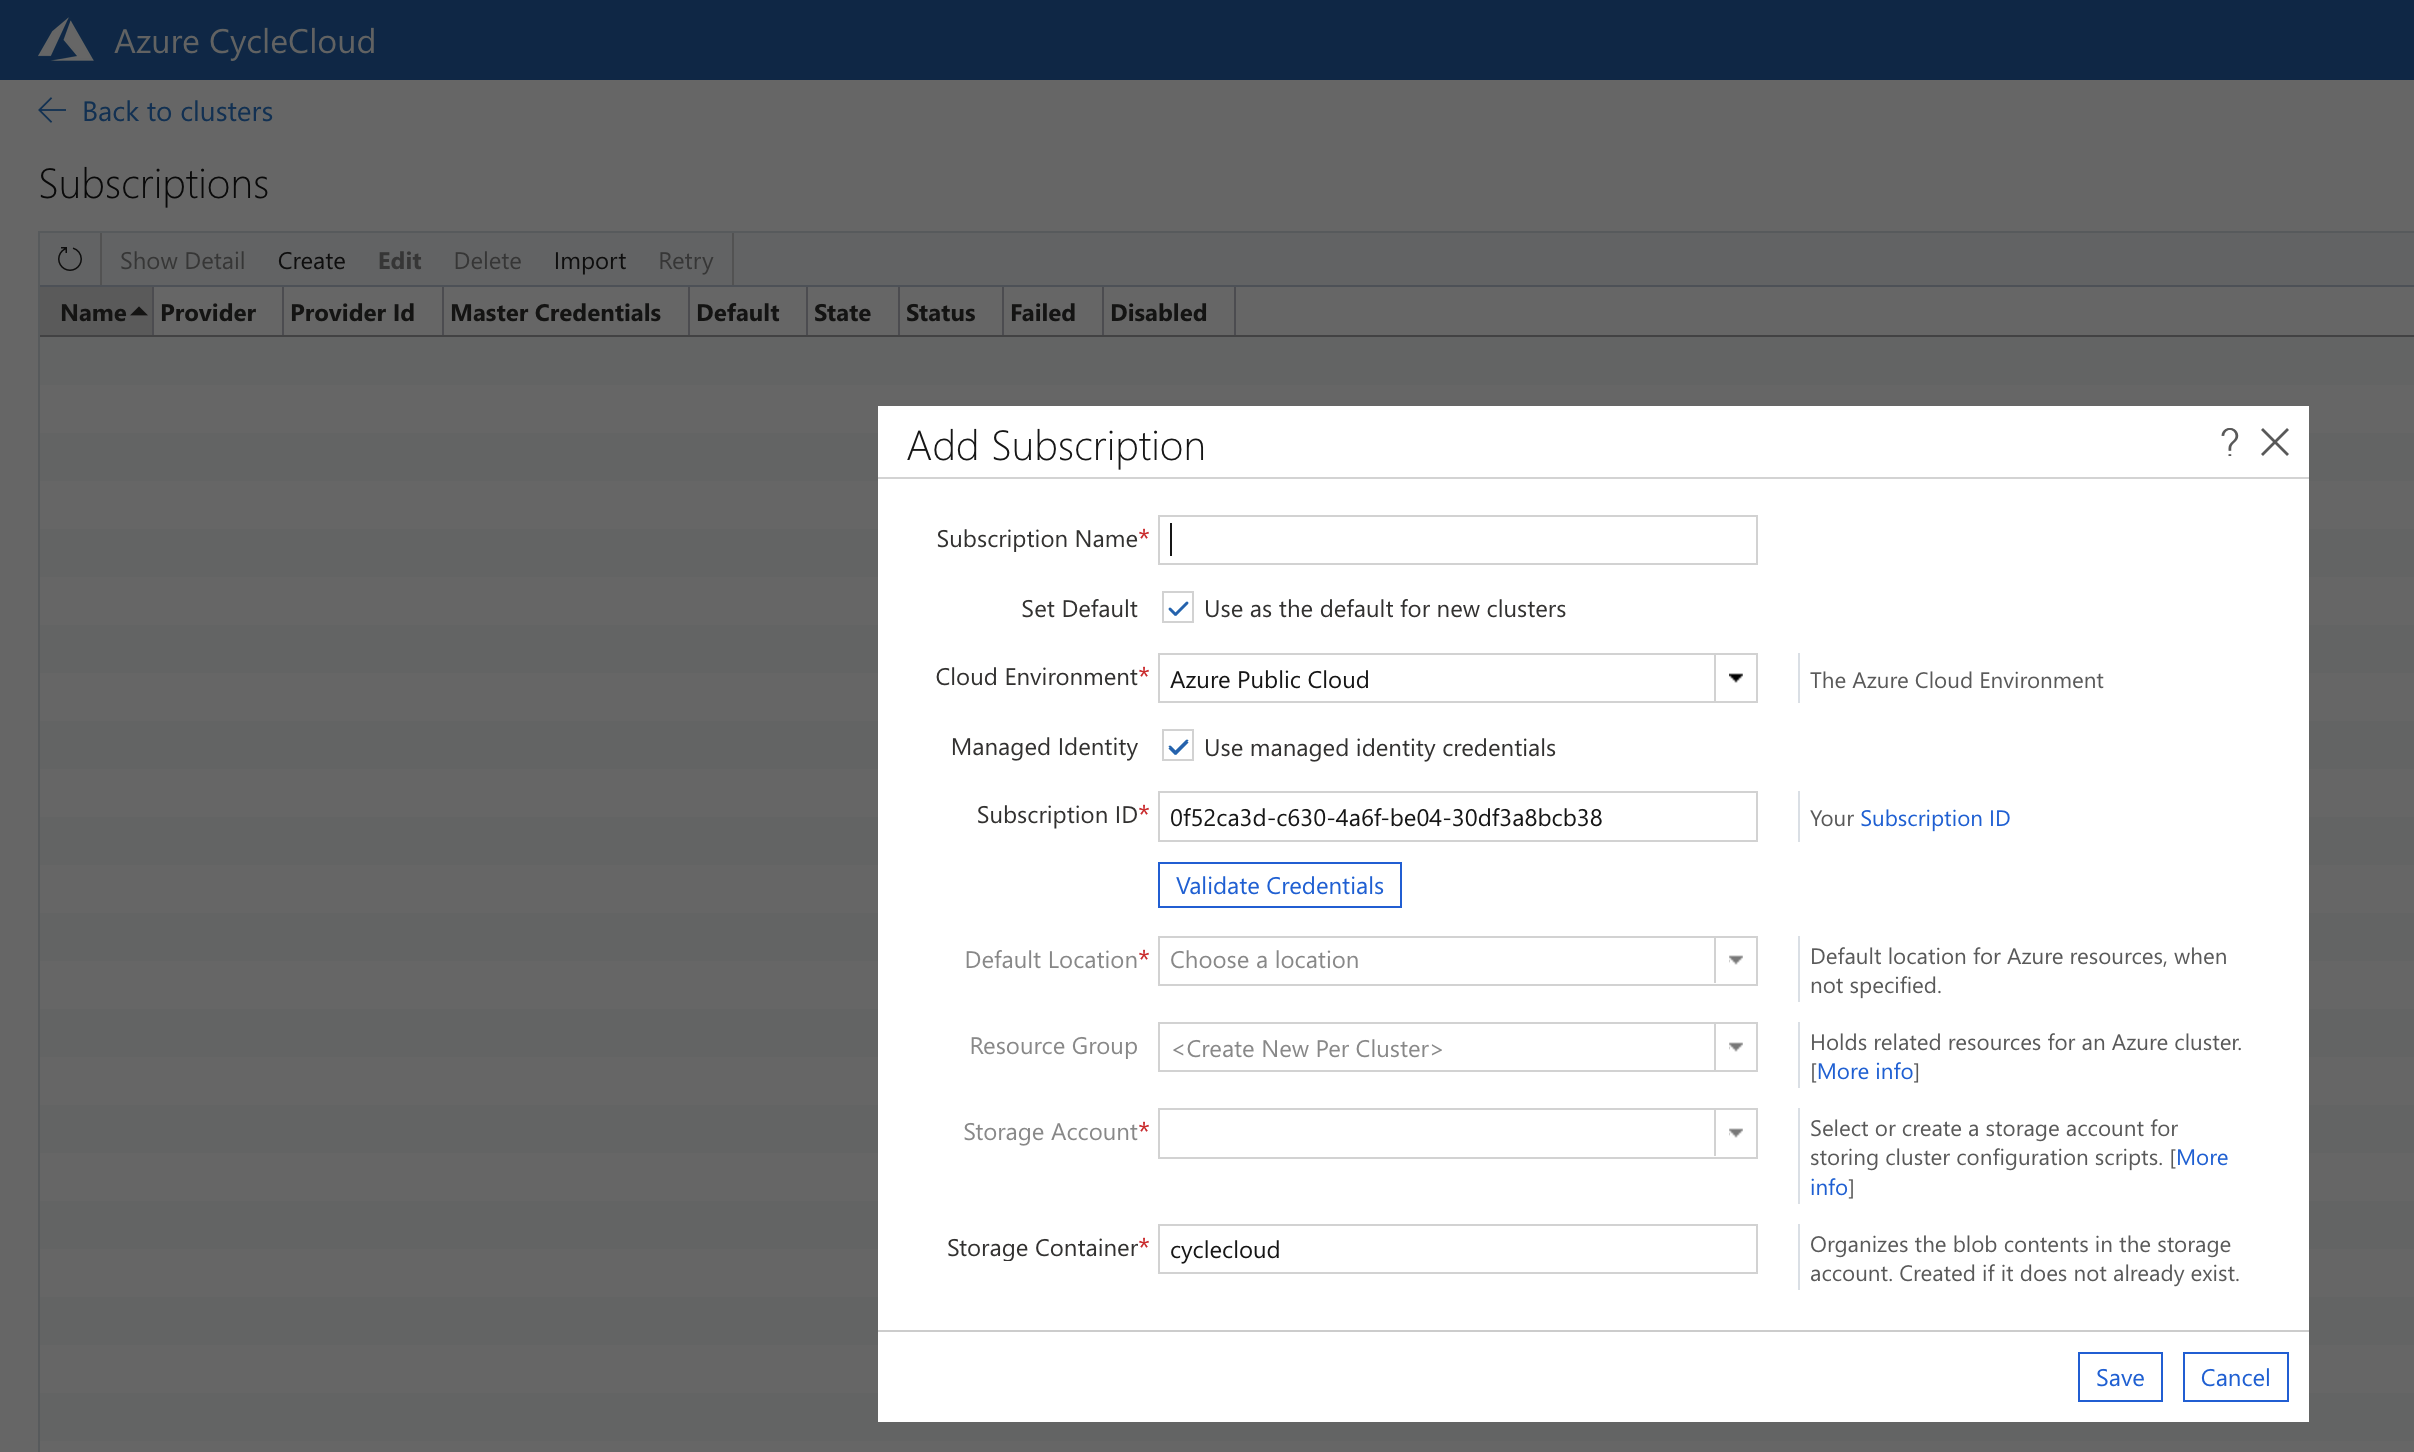 Azure CycleCloud Add Subscription